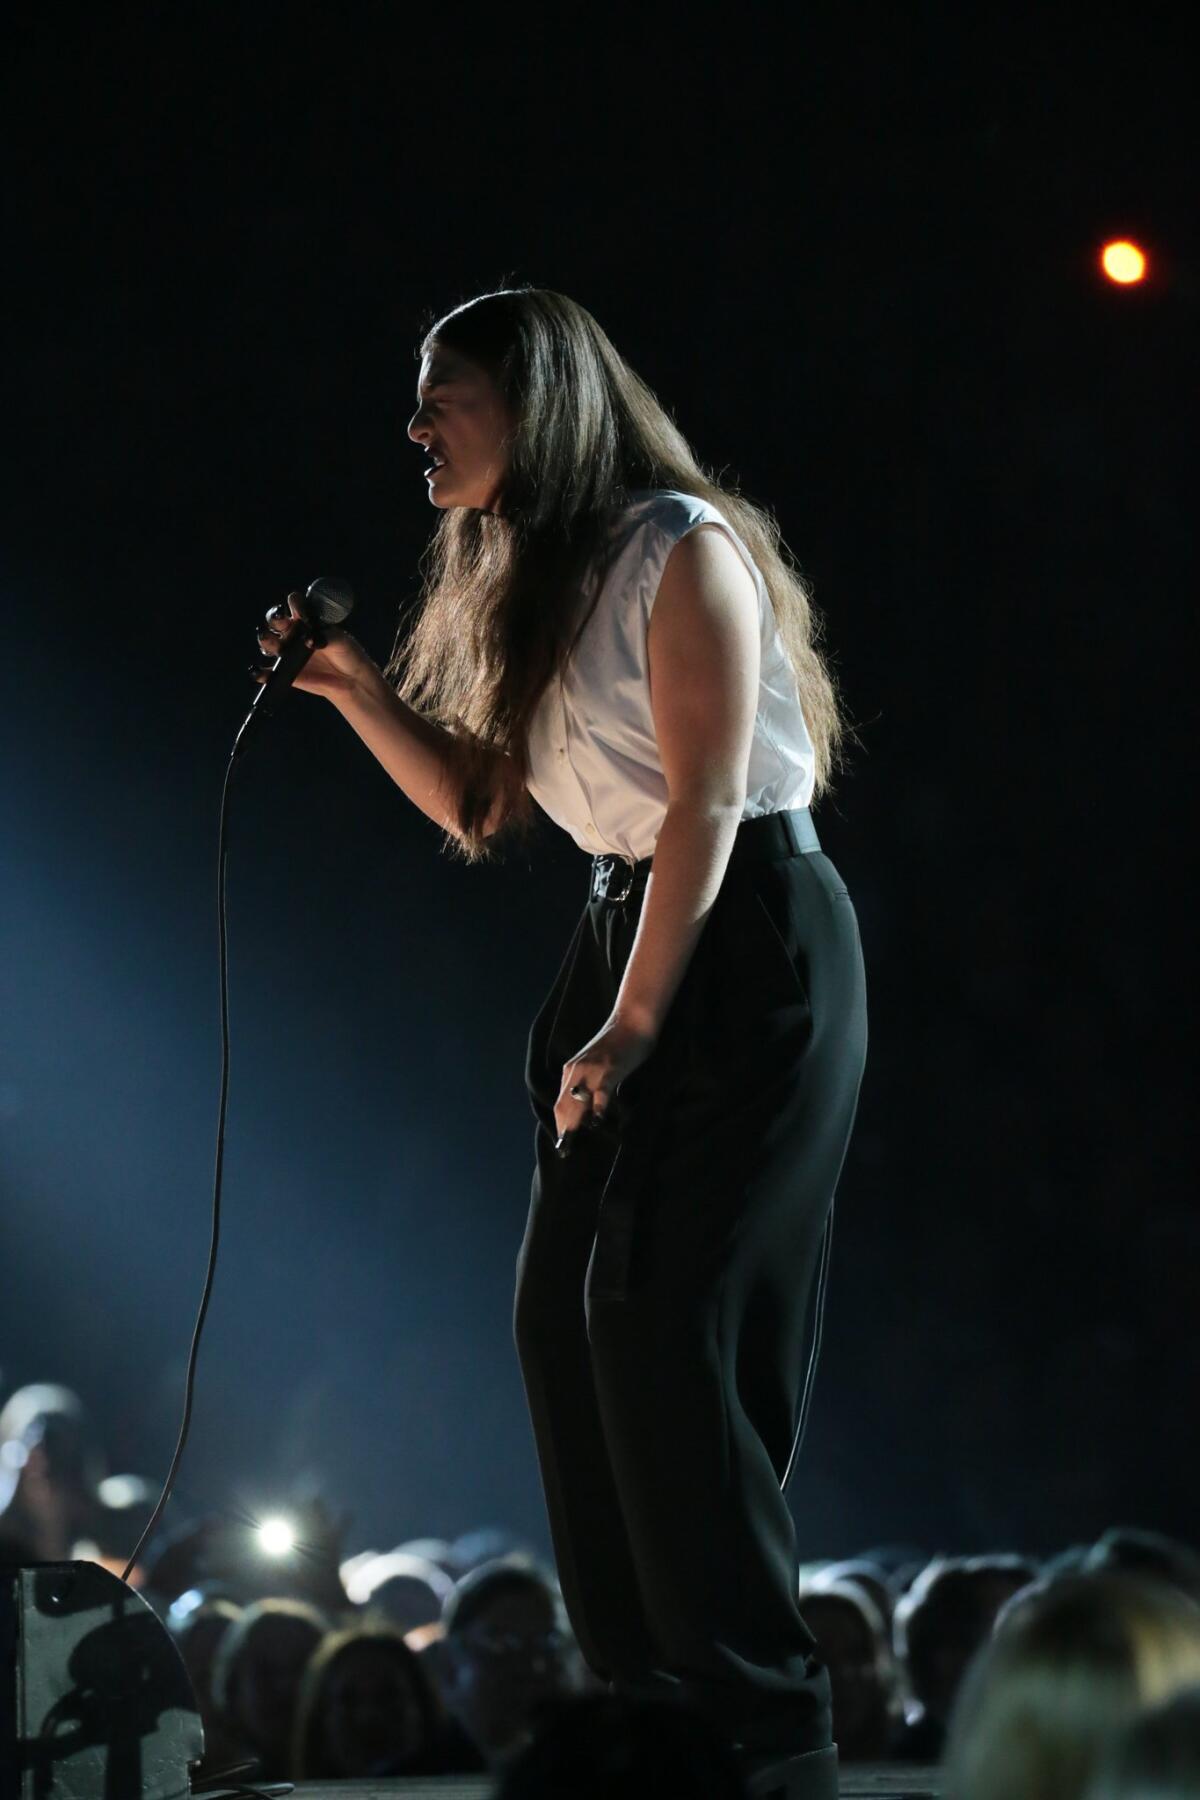 Lorde wears trousers and a white shirt to perform at the 56th Annual Grammy Awards at Staples Center in Los Angeles.